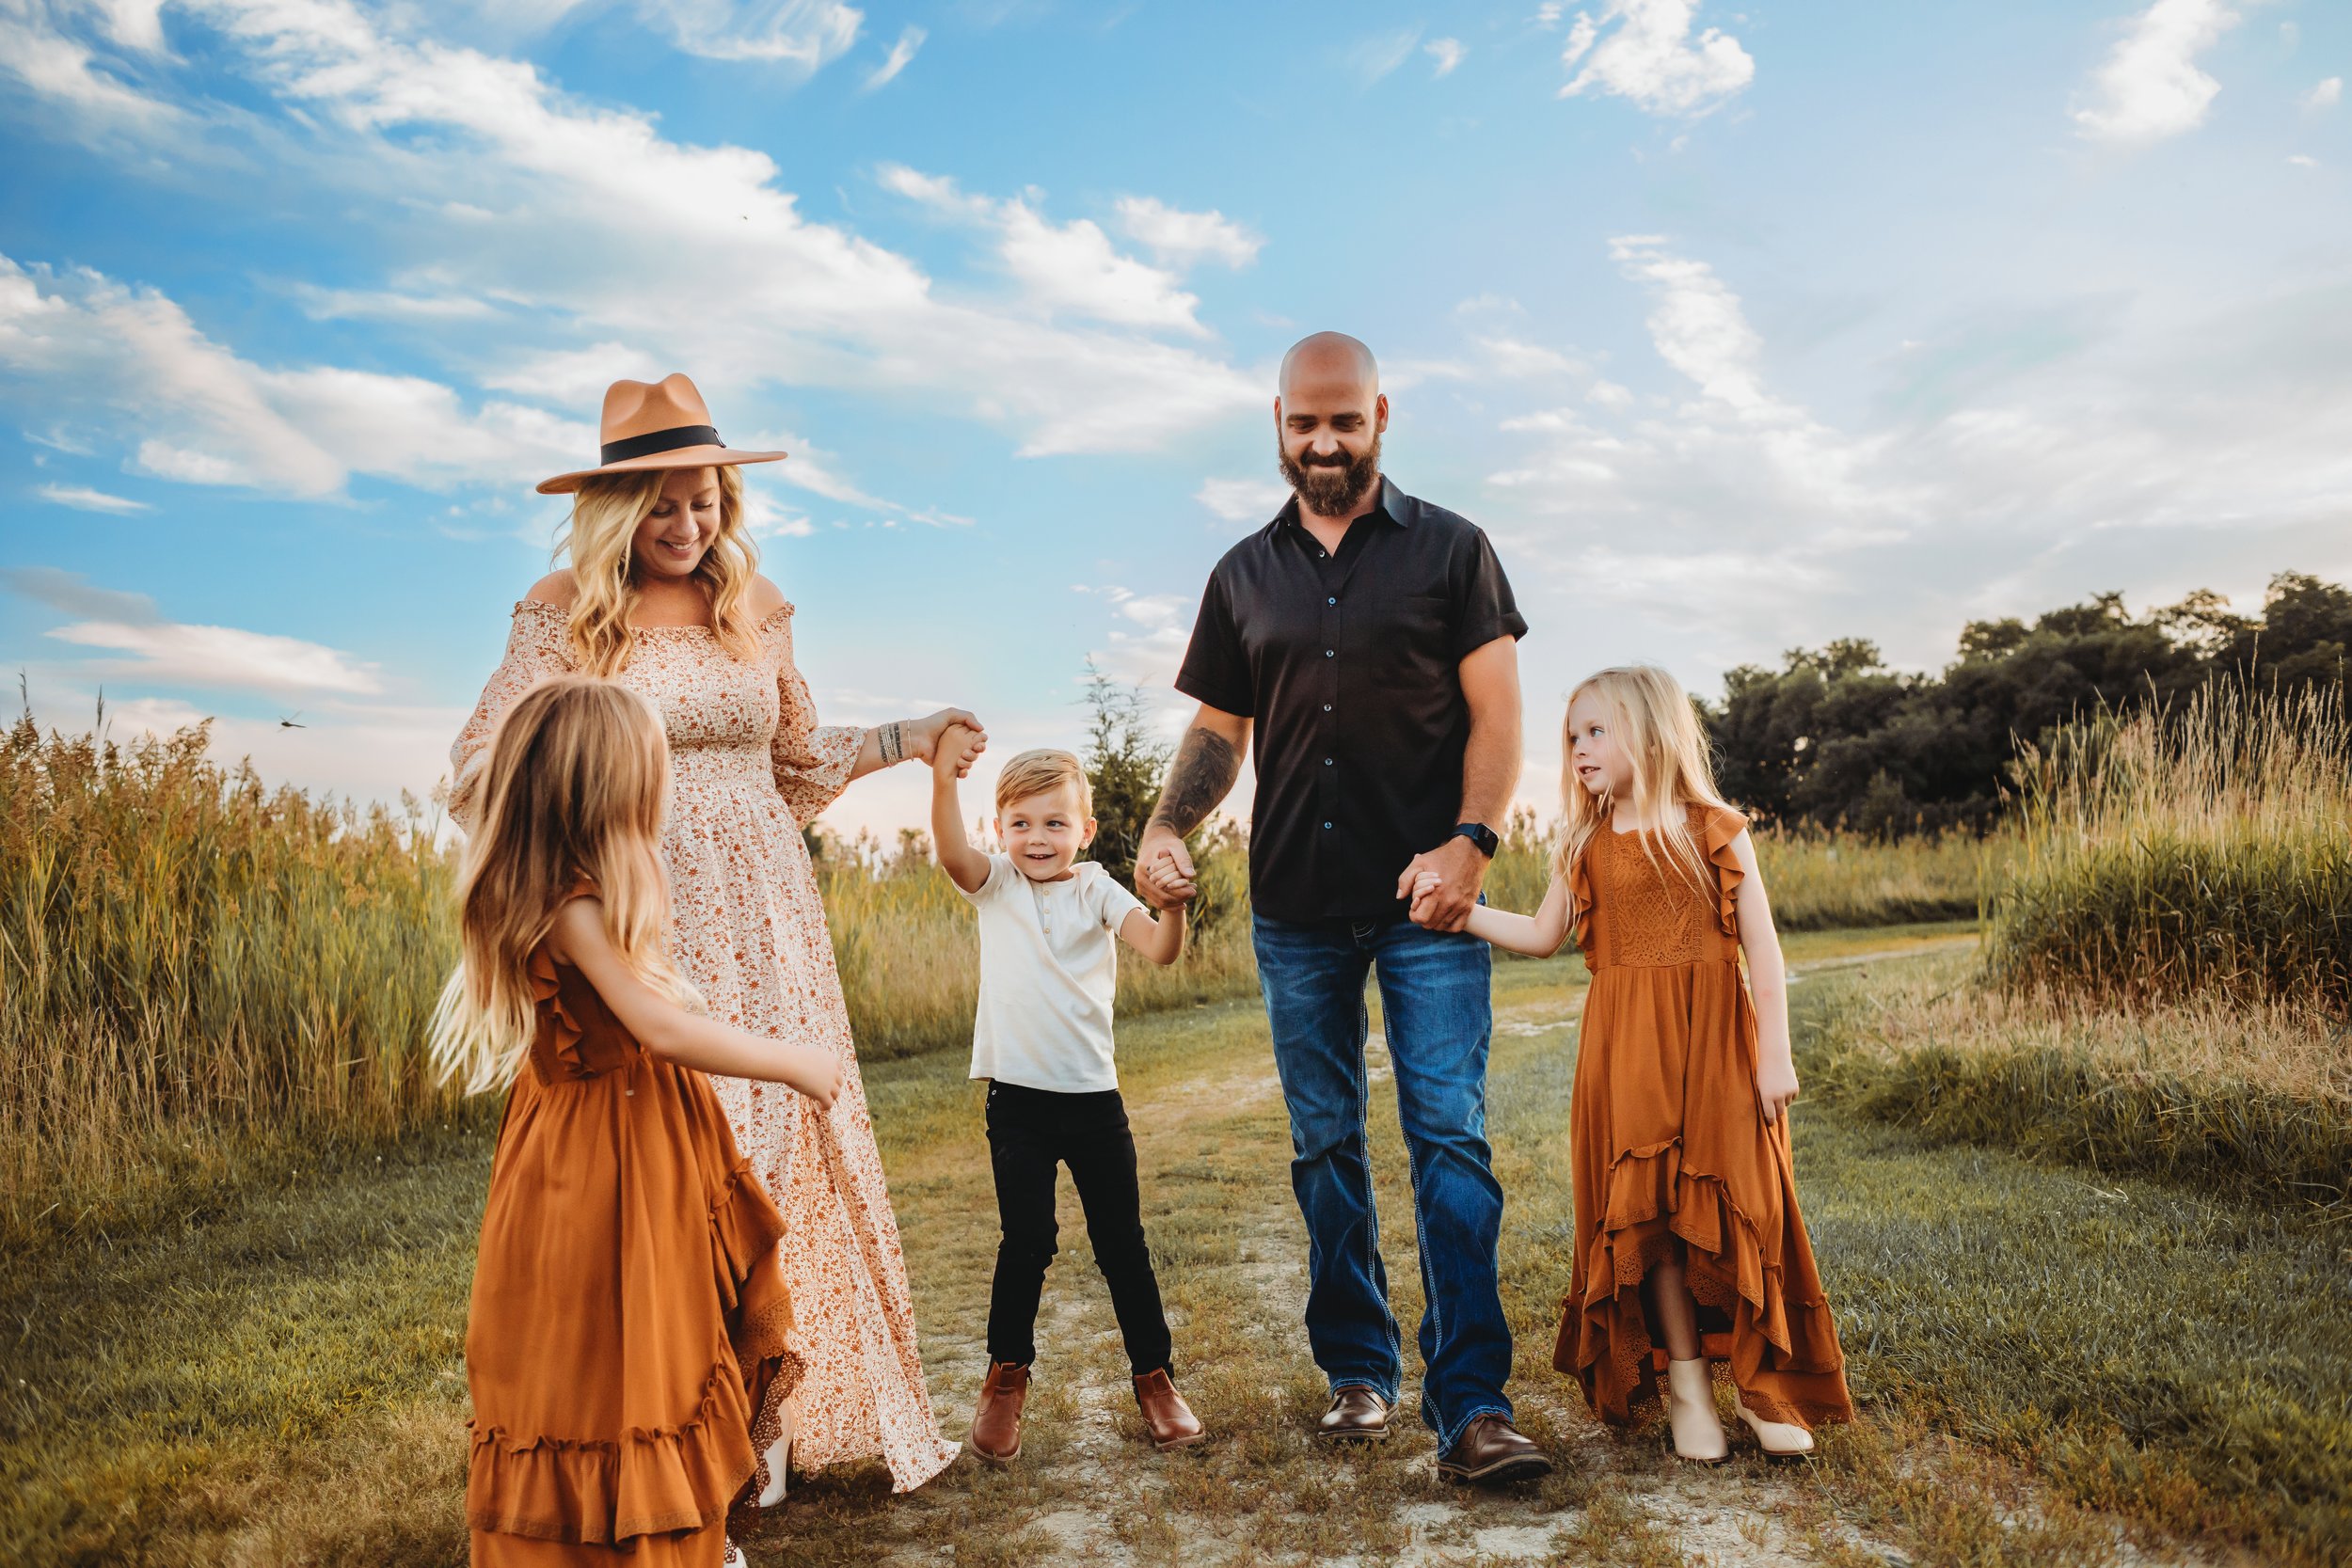  Teala Ward Photography captures a family playing together to keep the children happy. tips for family photography young kids #TealaWardPhotography #IllinoisValleyPhotographer #midwestphotography #TealaWardFamilies #Illinoisfamilypictures 